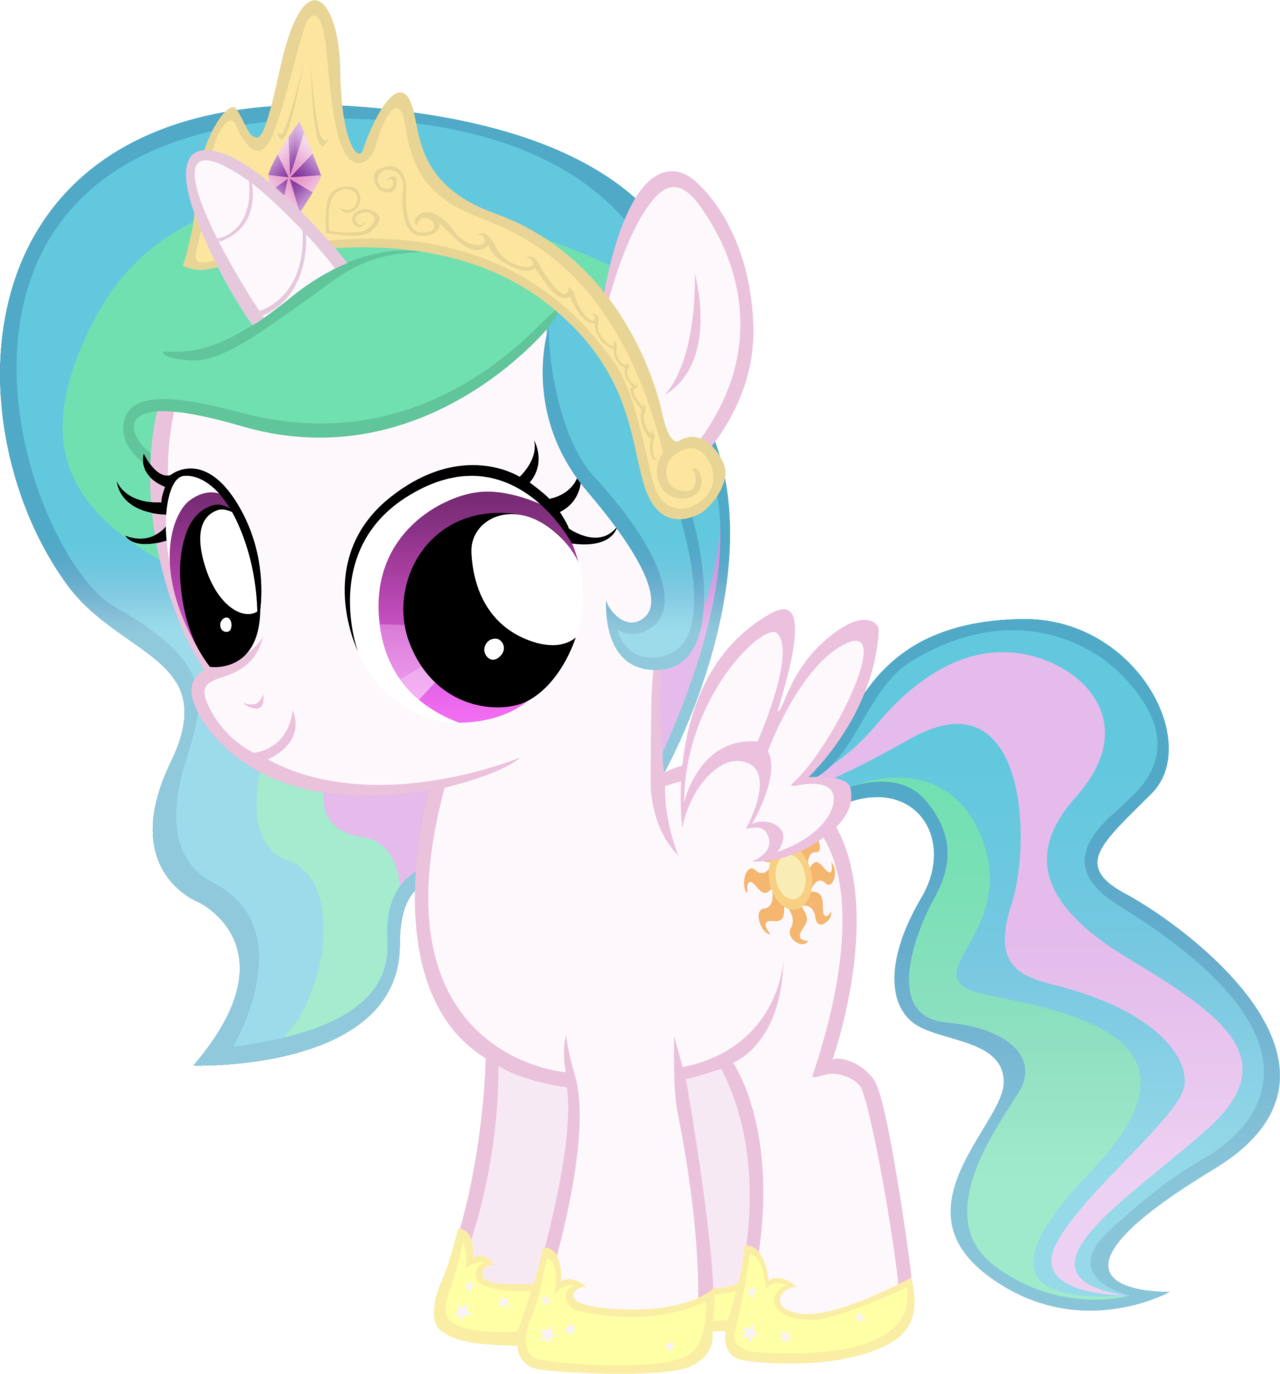 [Bild: Celestia_Filly_by_MoongazePonies.png]